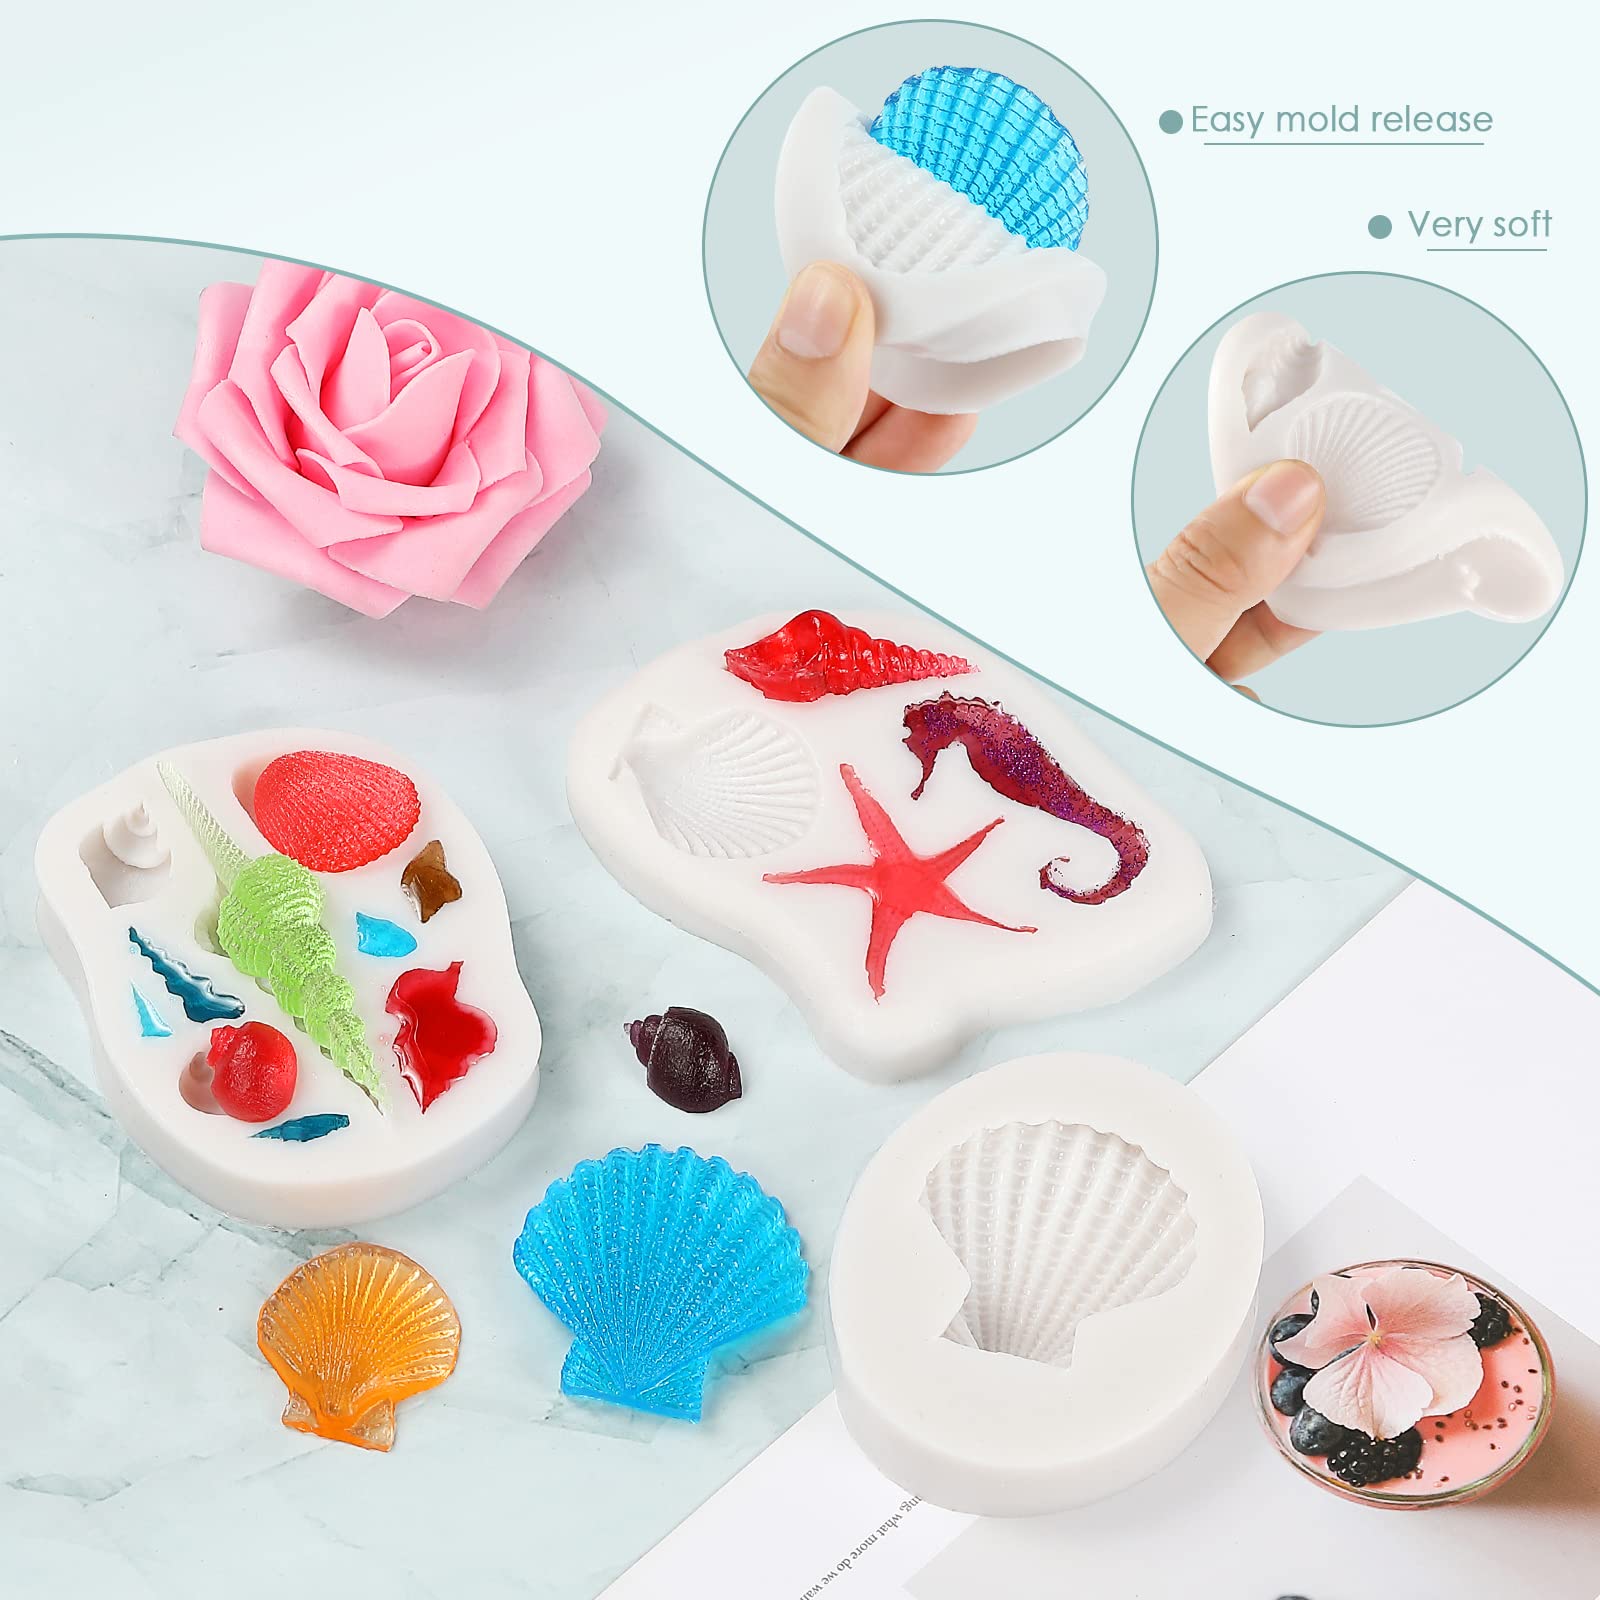 5 Pcs Marine Theme Cake Fondant Silicone Mold Set, Seashell Conch Starfish Hippocampus DIY Baking Molds for Mermaid Theme Cake Decoration Fondant Chocolate Candy Polymer Clay Crafting Projects